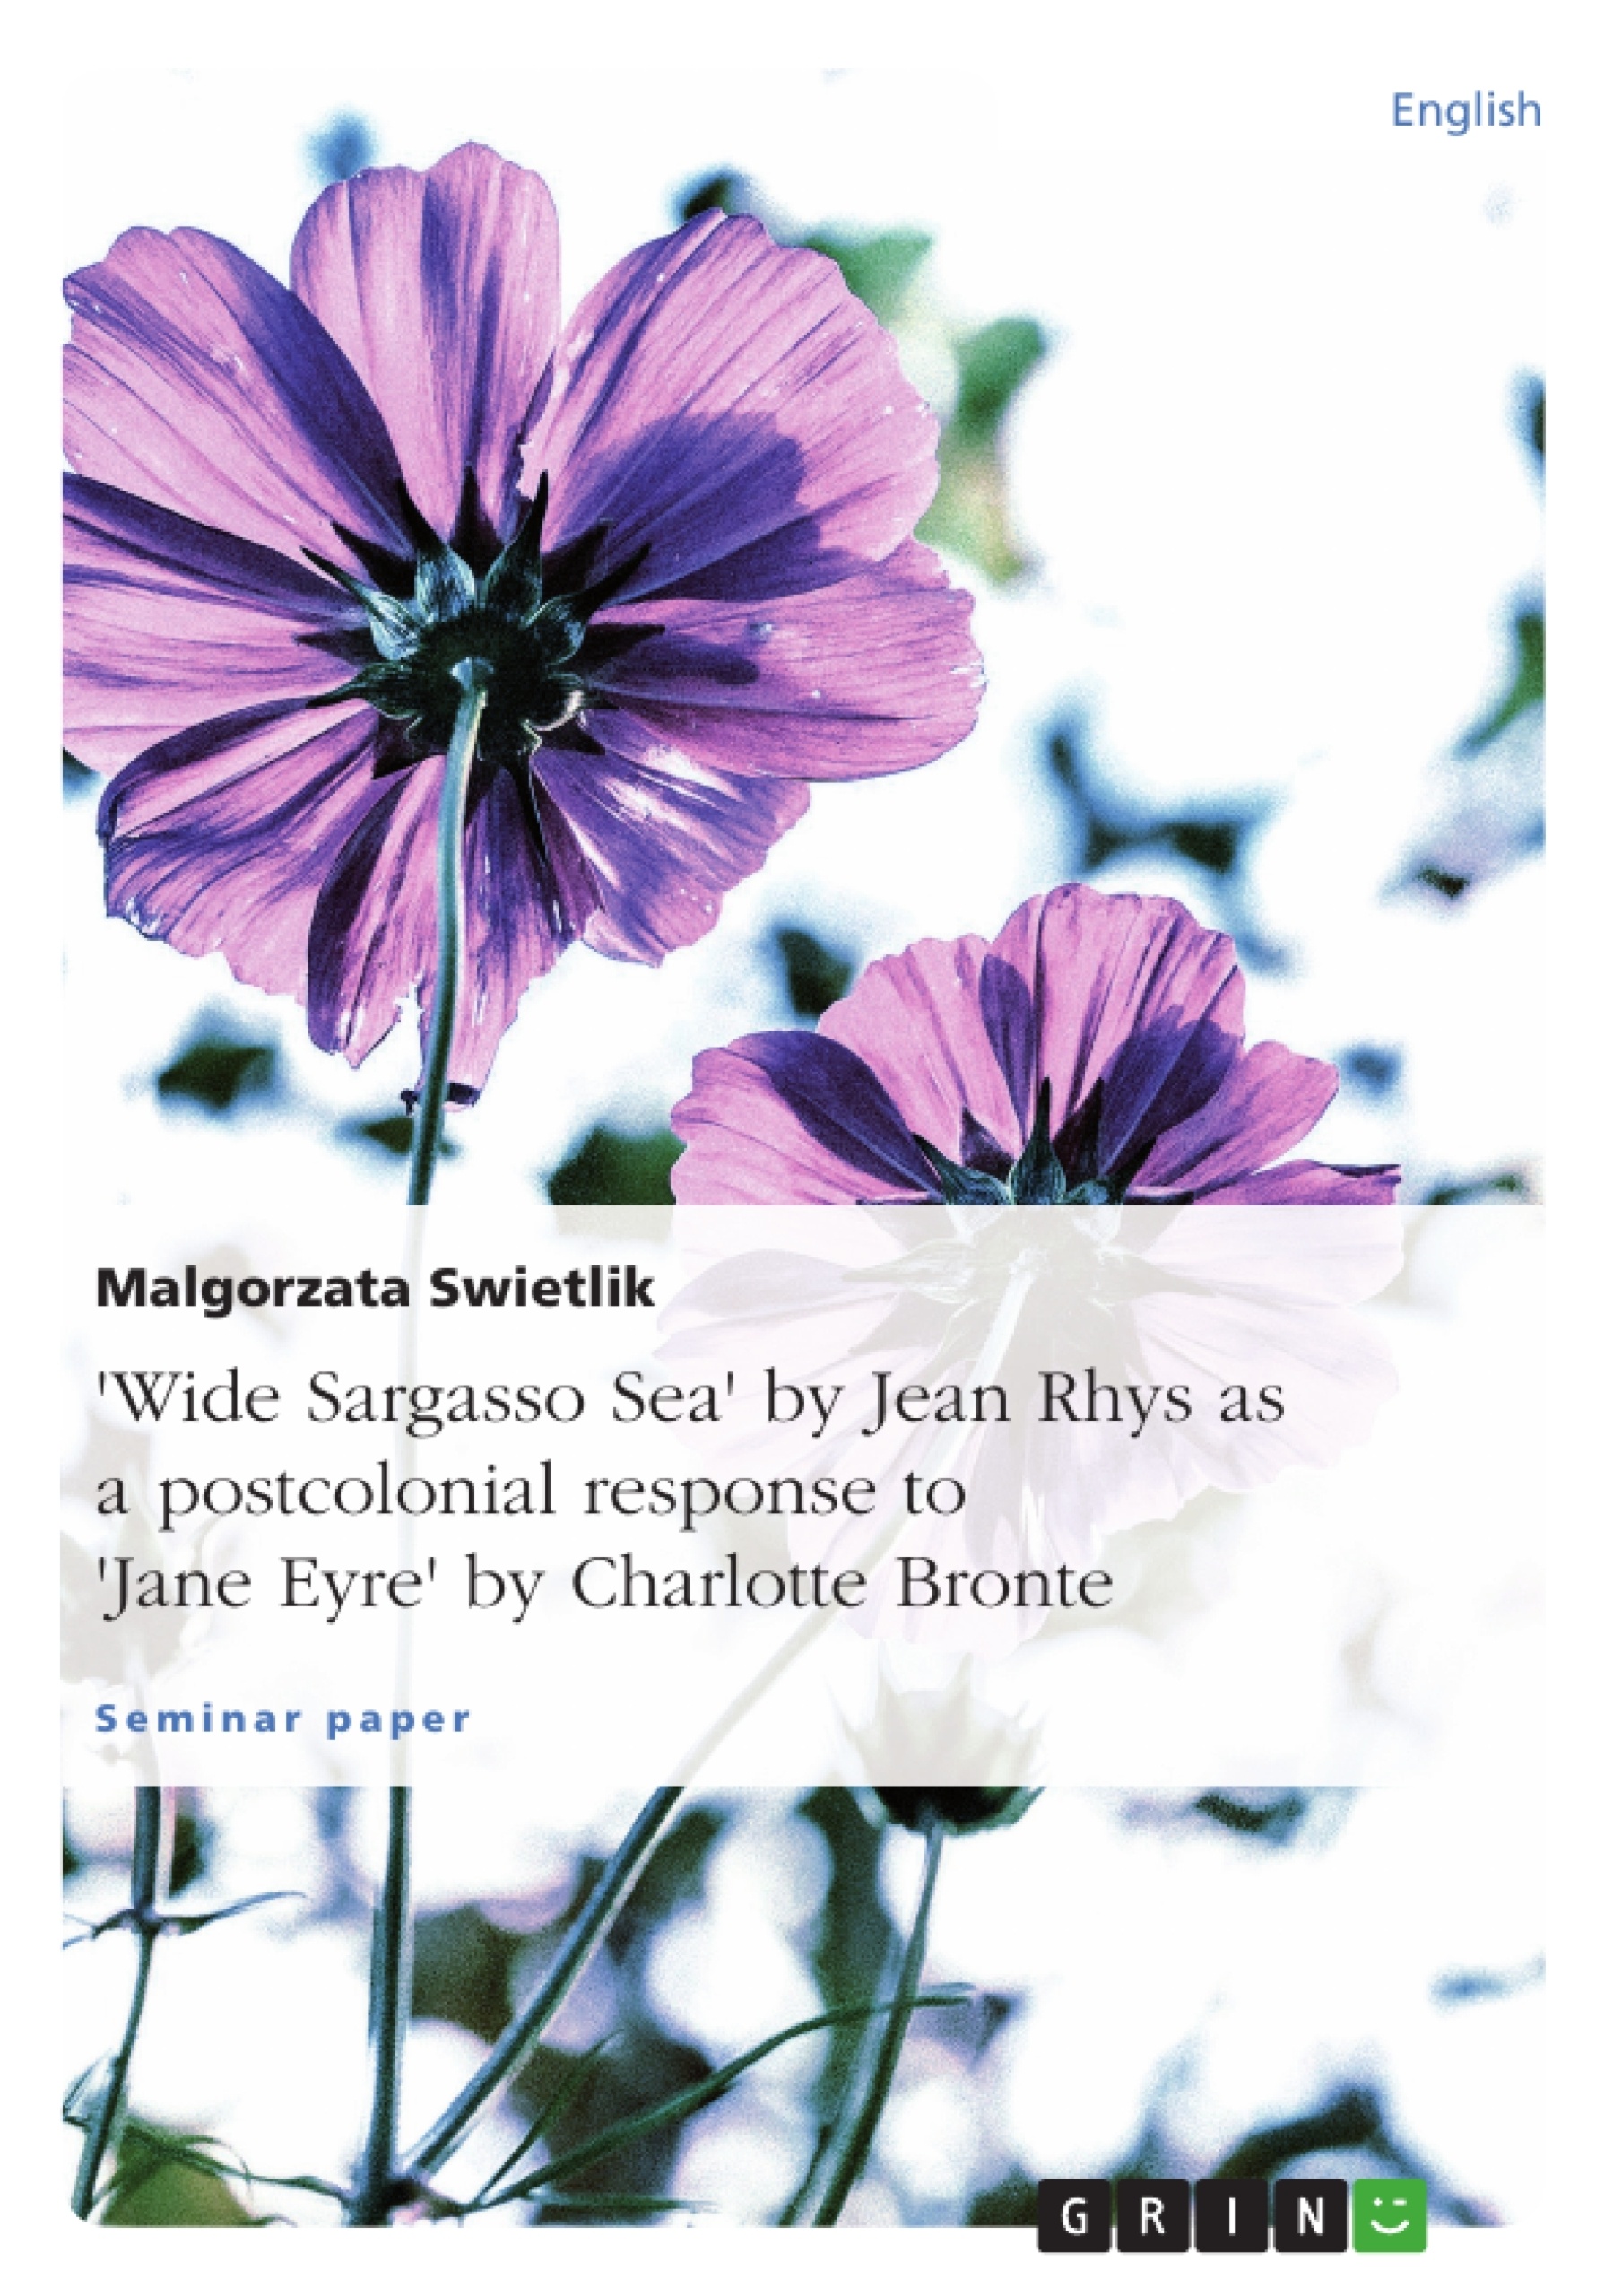 Titre: "Wide Sargasso Sea" by Jean Rhys as a postcolonial response to "Jane Eyre" by Charlotte Bronte